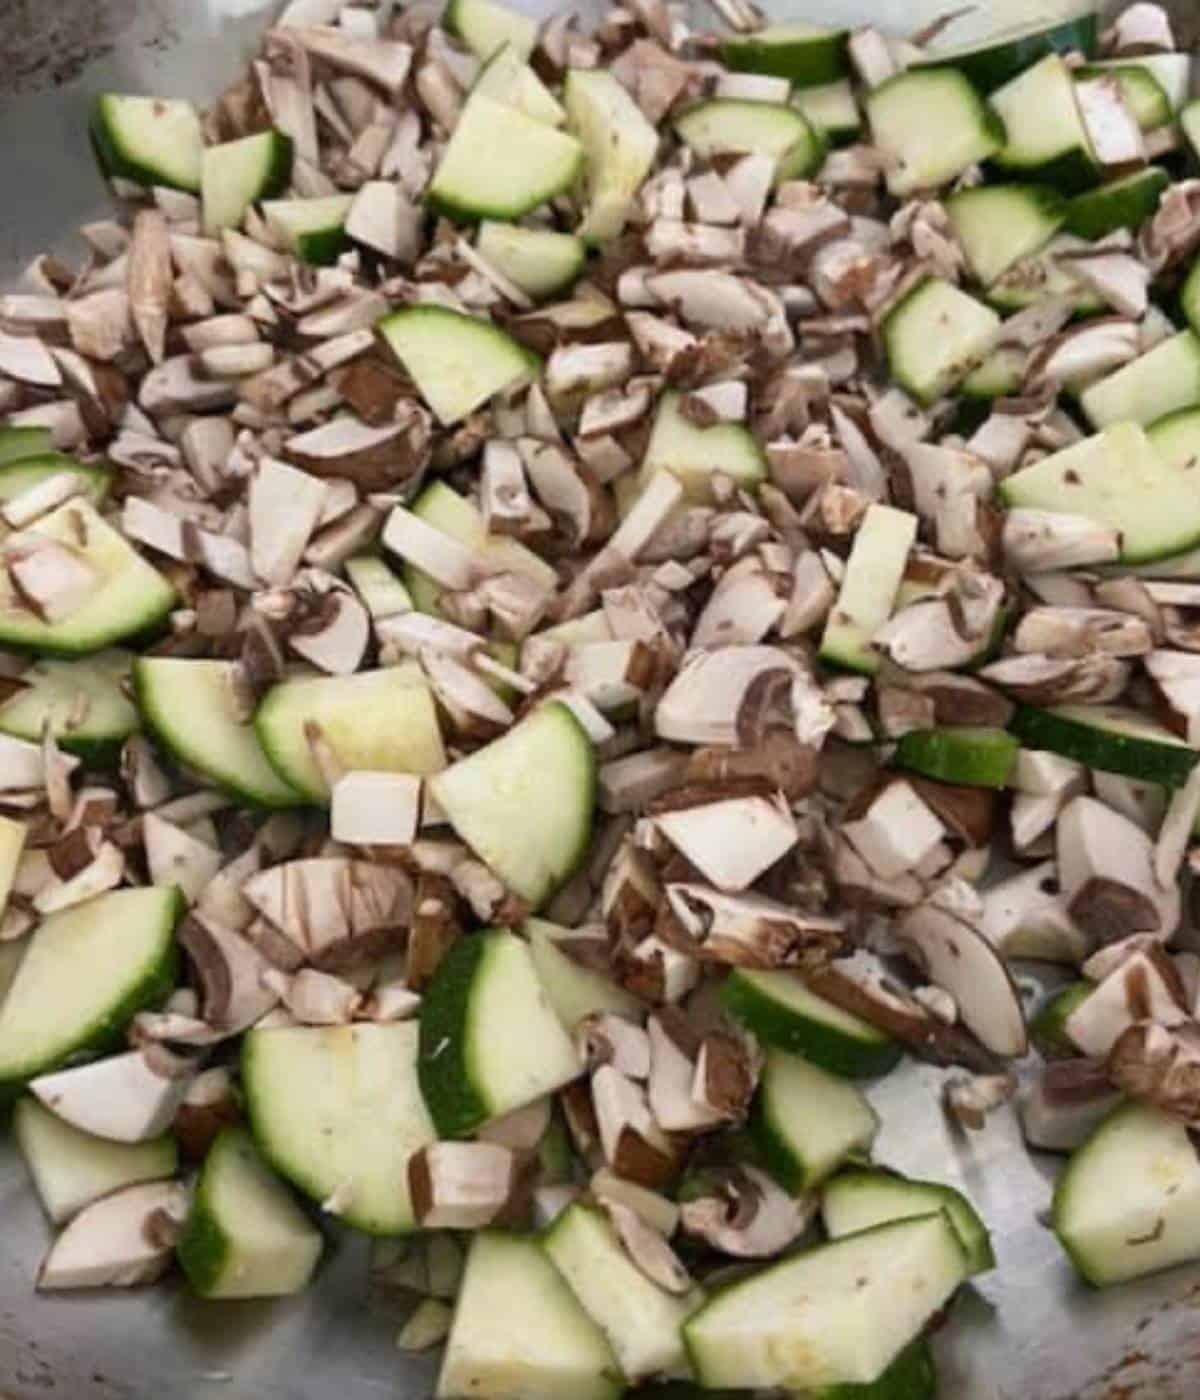 Mushroom and zucchini cooking in pan.